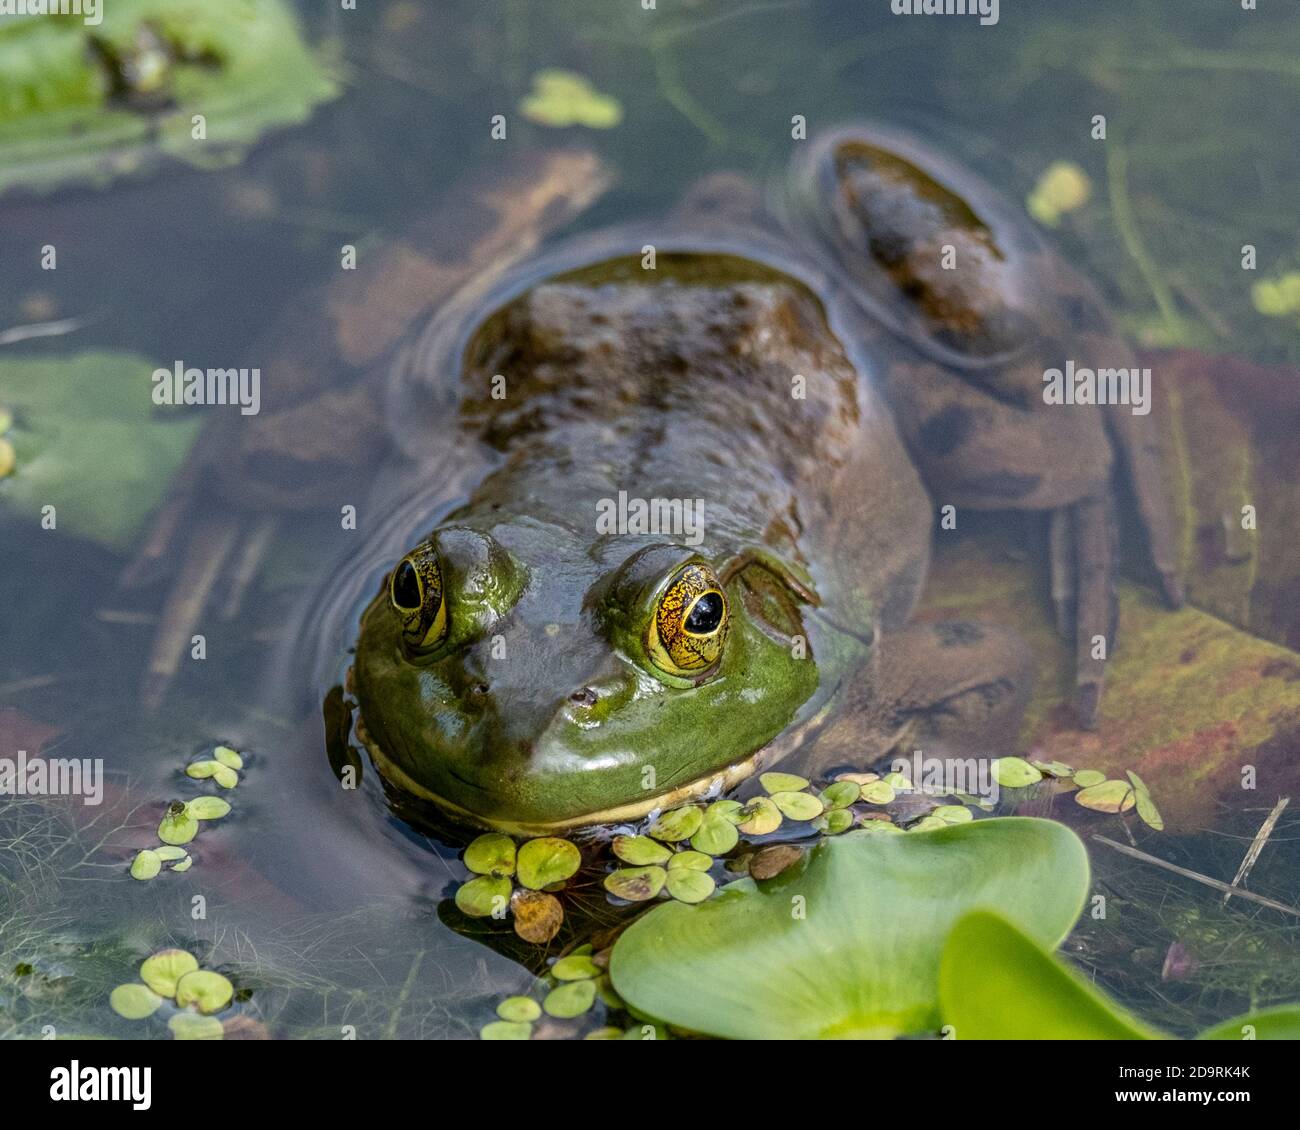 A green frog in a small pond Stock Photo